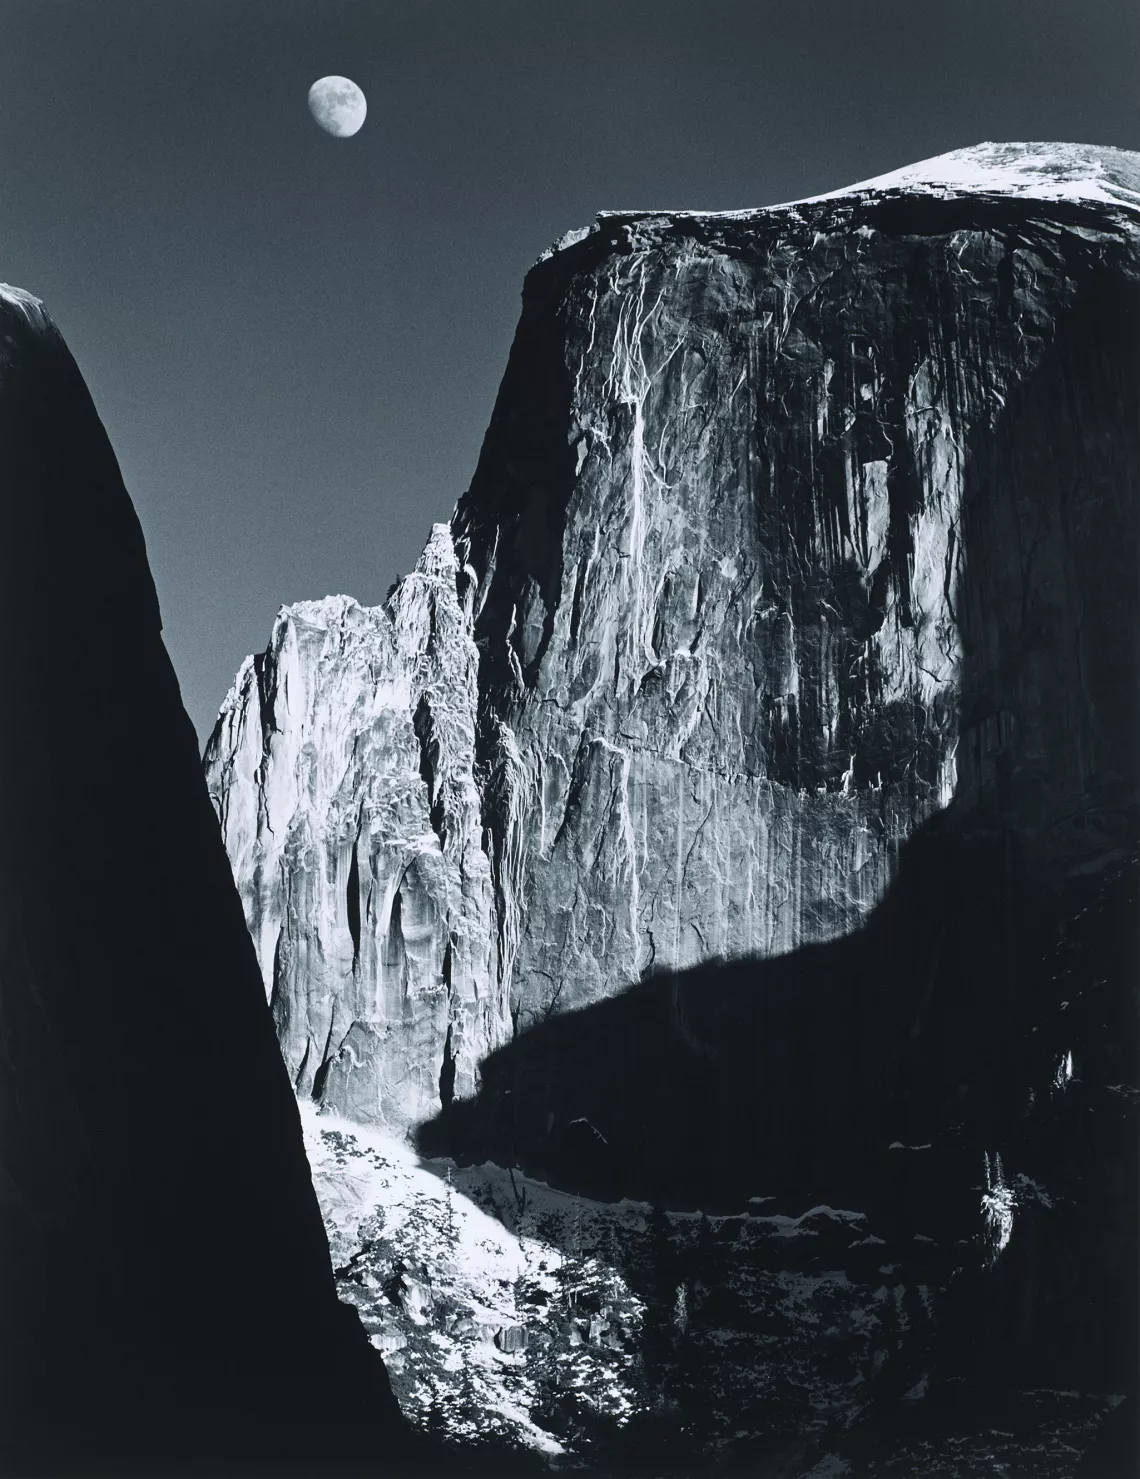 Ansel Adams, "Moon and Half Dome, Yosemite National Park” (detail), 1960 Photograph, gelatin silver print. Museum of Fine Arts, Boston. The Lane Collection. Courtesy of Museum of Fine Arts, Boston. ©️ The Ansel Adams Publishing Rights Trust. Exhibition organized by @MFABoston in partnership with the Fine Arts Museums of San Francisco.